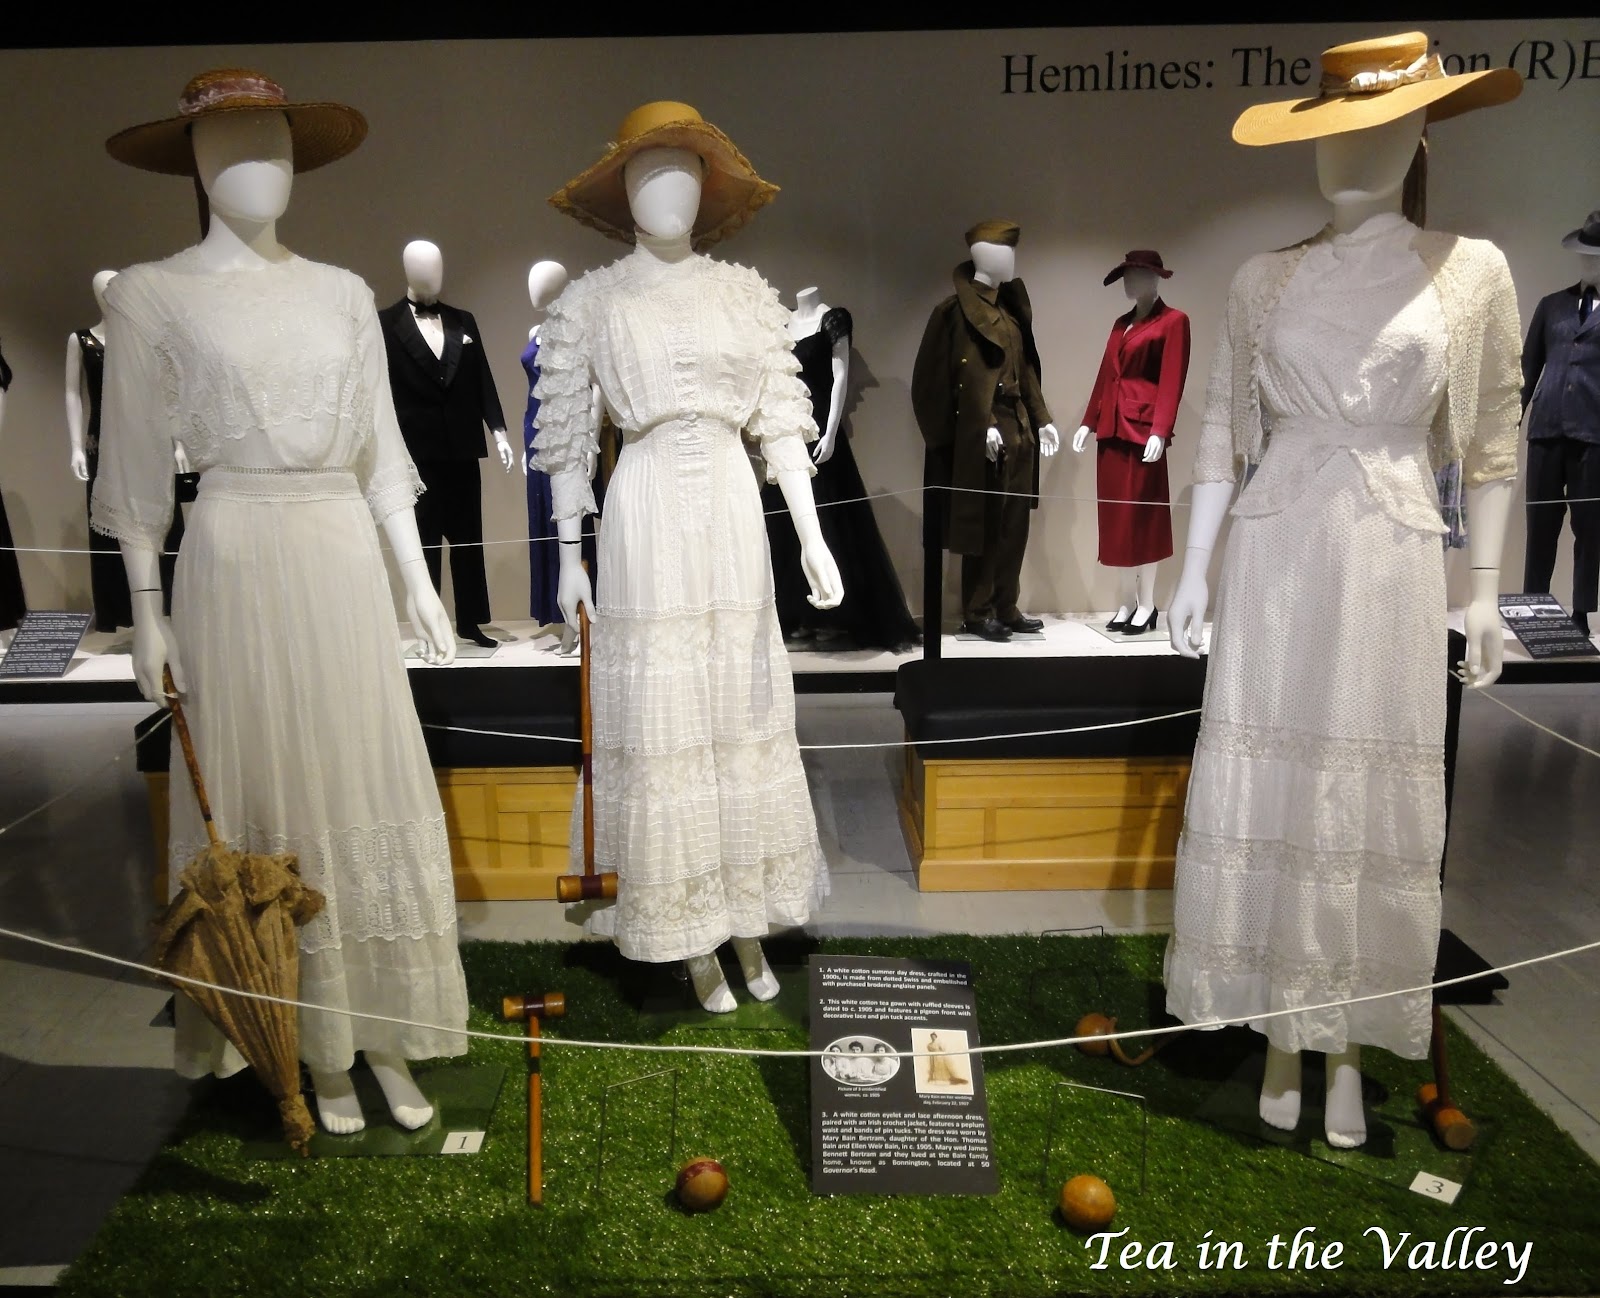 The Tea Gown - Bridging Victorian and Edwardian Fashion